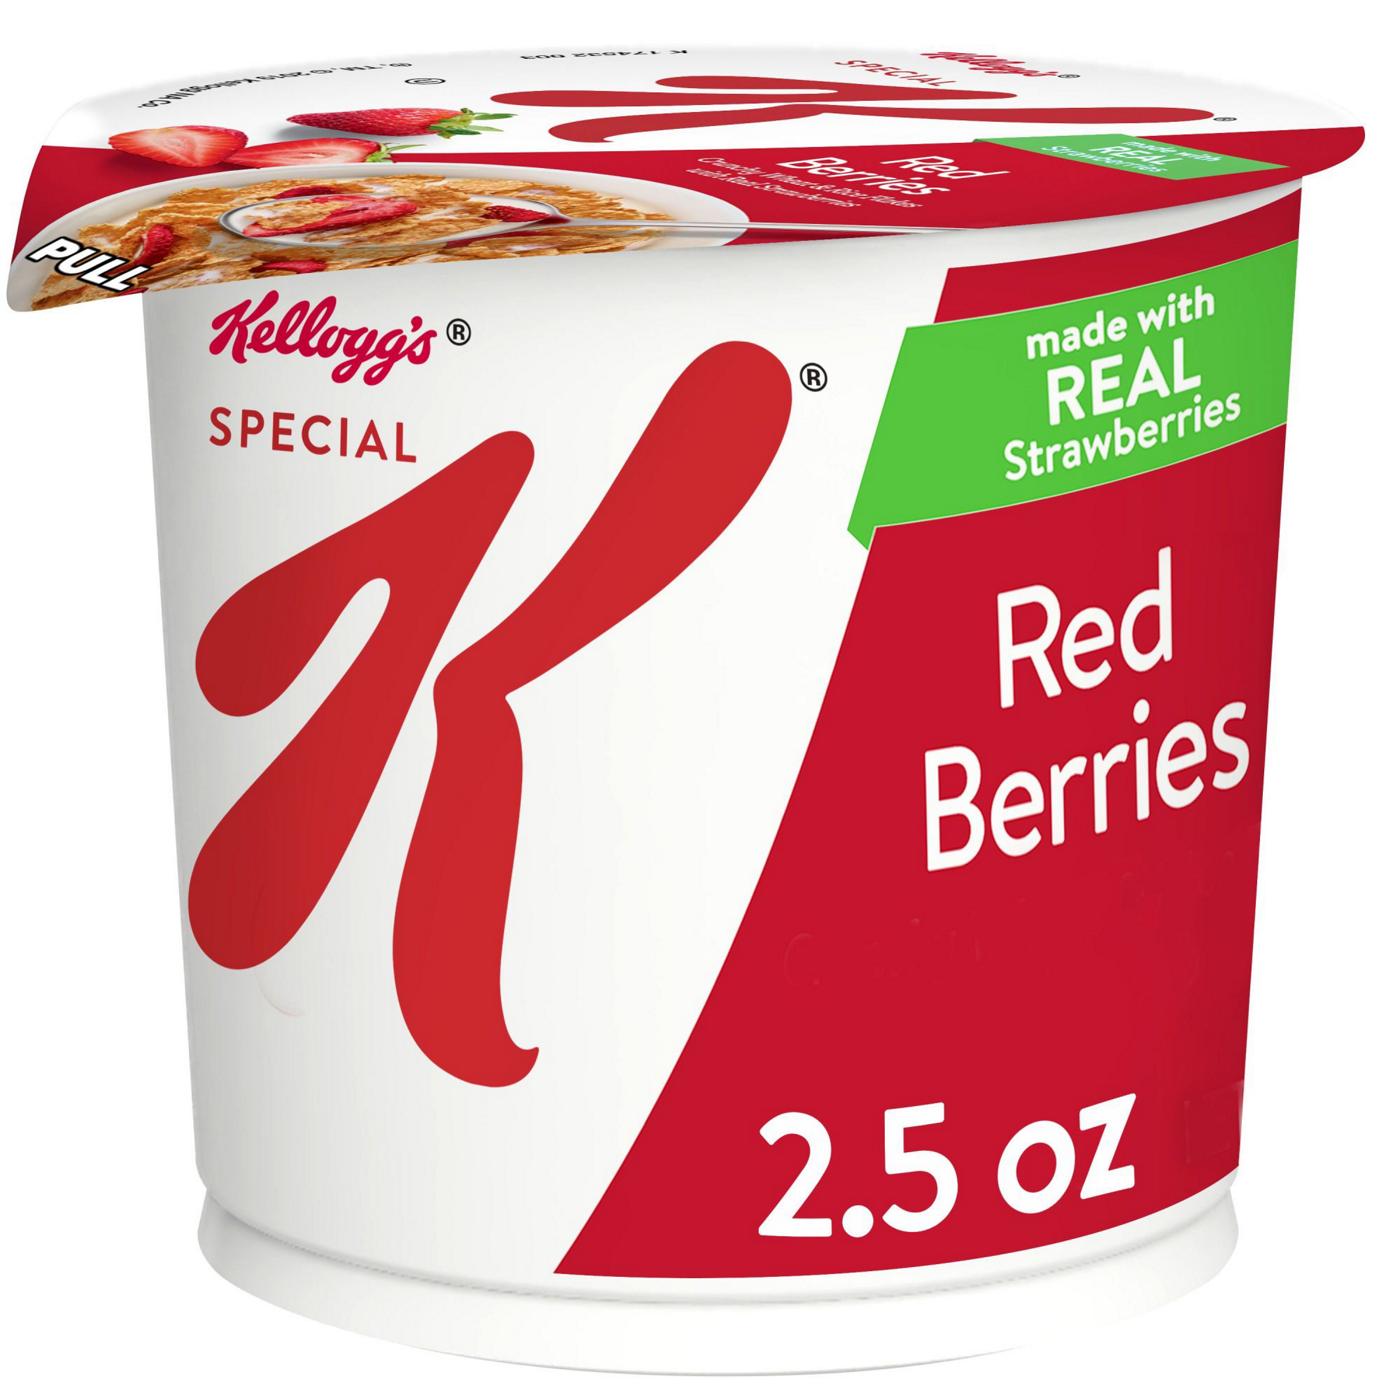 Special K 1 Cup Measuring Cup Clear Red Rim Plastic 2011 Kellogg